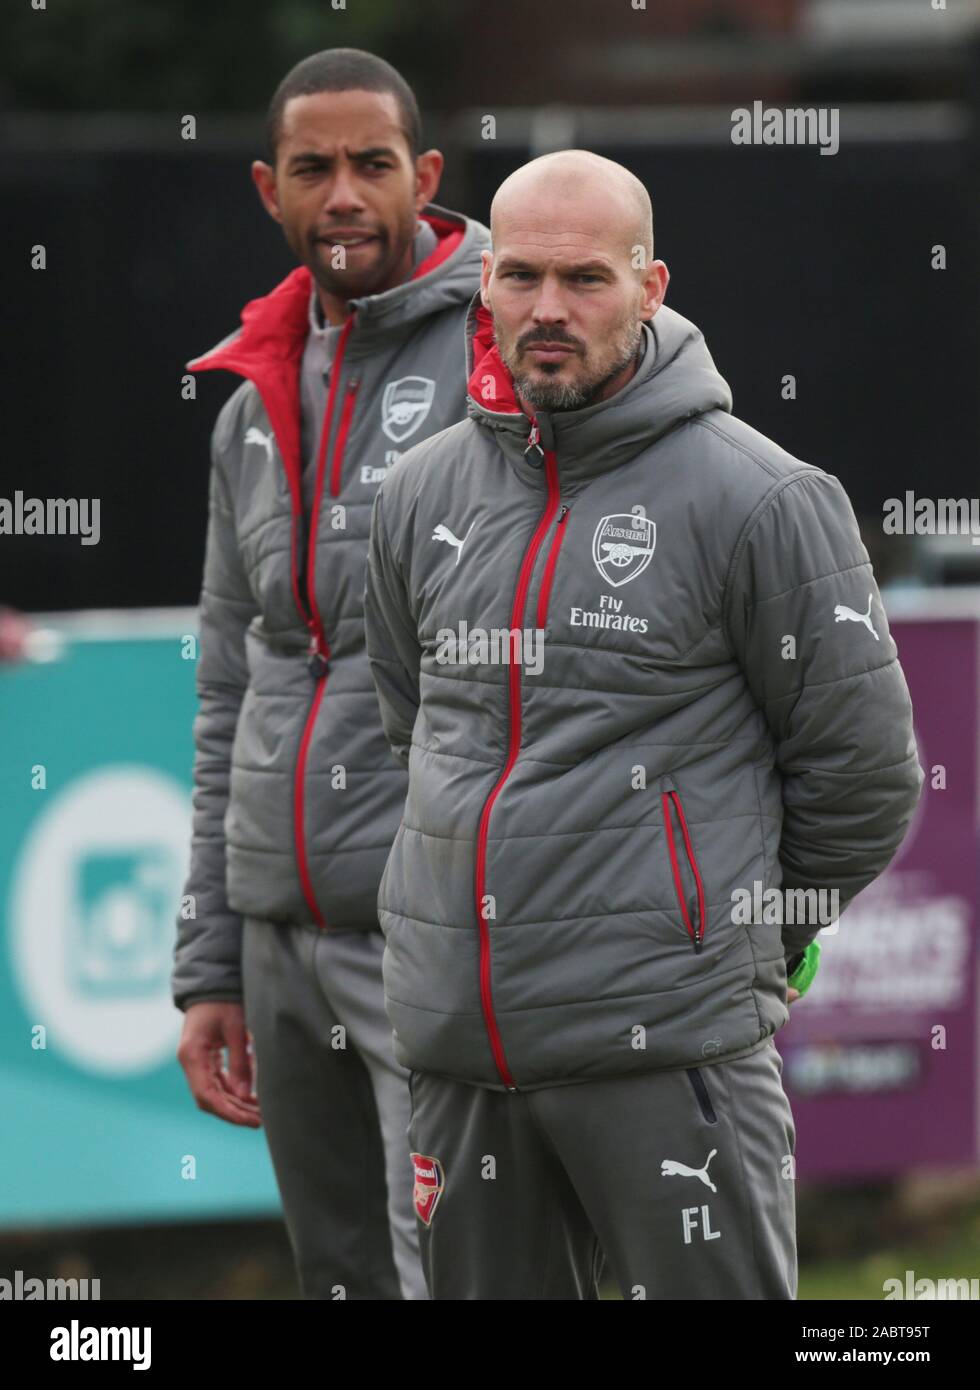 L-R Arsenal's U19s Academy Head Foundation phase coach Ryan Garry and Ex Arsenal player, Freddie Ljungberg, now working for their Academy during UEFA Youth League match between Arsenal against Paris Saint-Germain at Boreham Wood Football Club on November 22nd 2016 Credit: Action Foto Sport/Alamy Live News Stock Photo